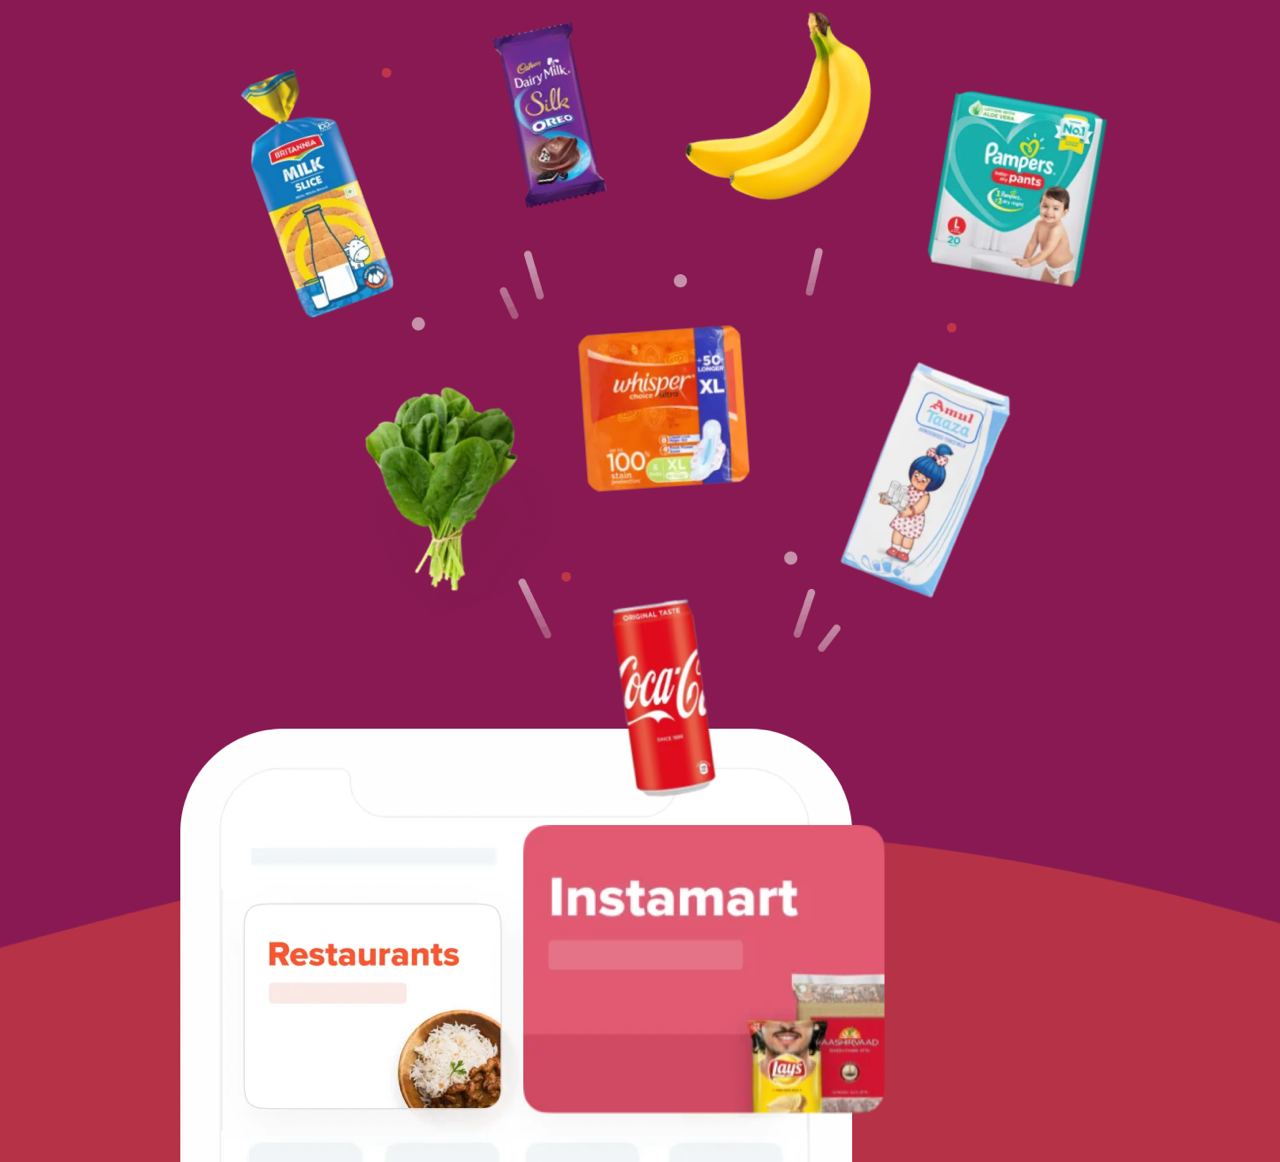 Swiggy Instamart Free Delivery Coupon codes